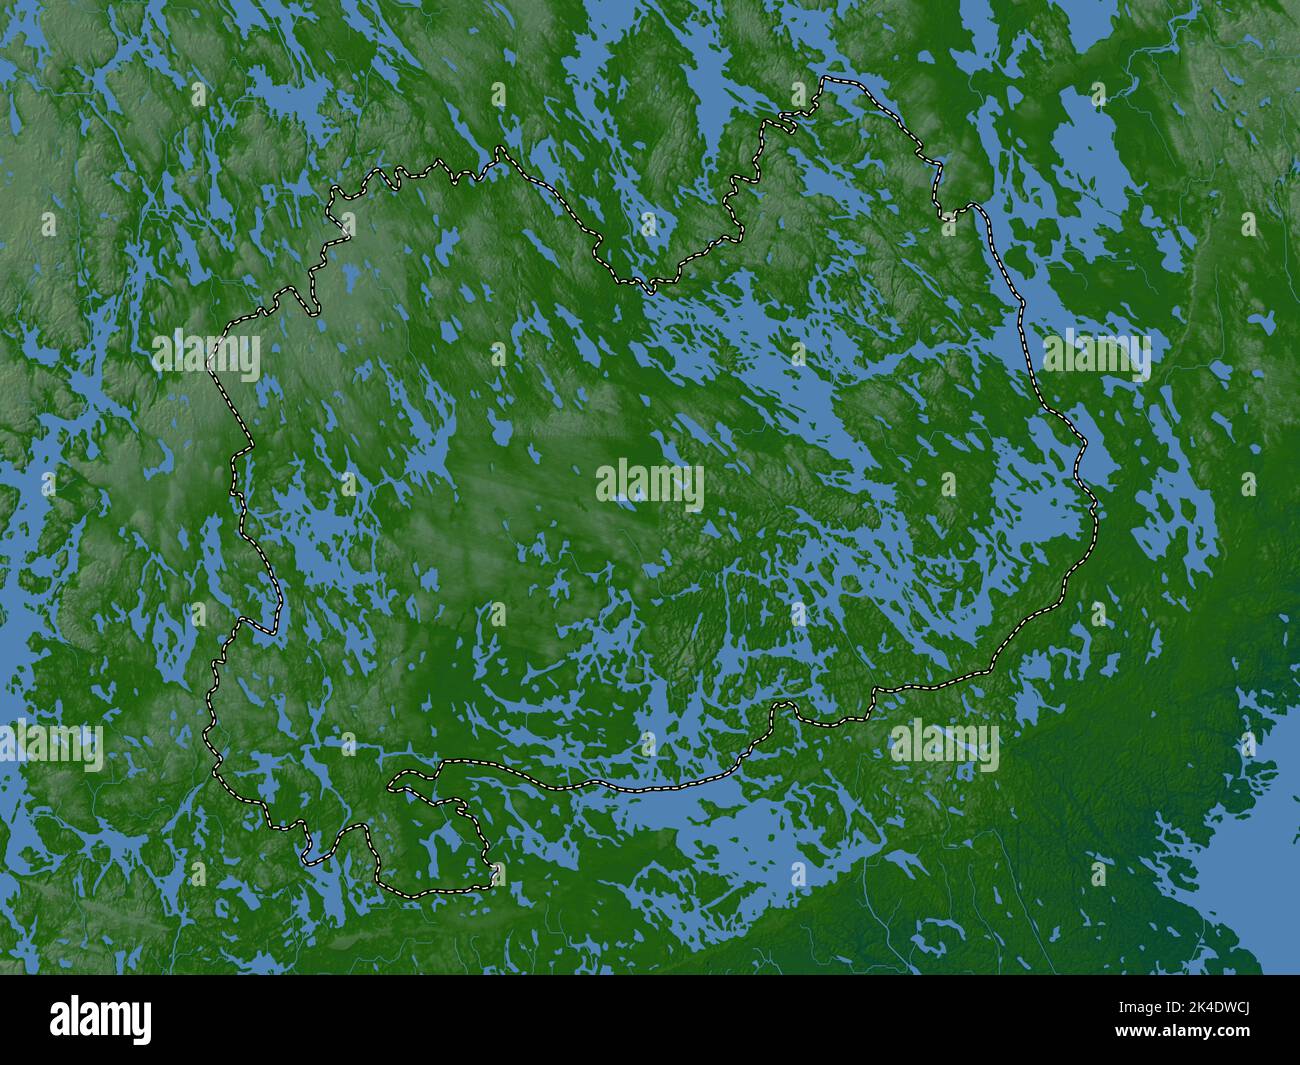 Southern Savonia, region of Finland. Colored elevation map with lakes and rivers Stock Photo